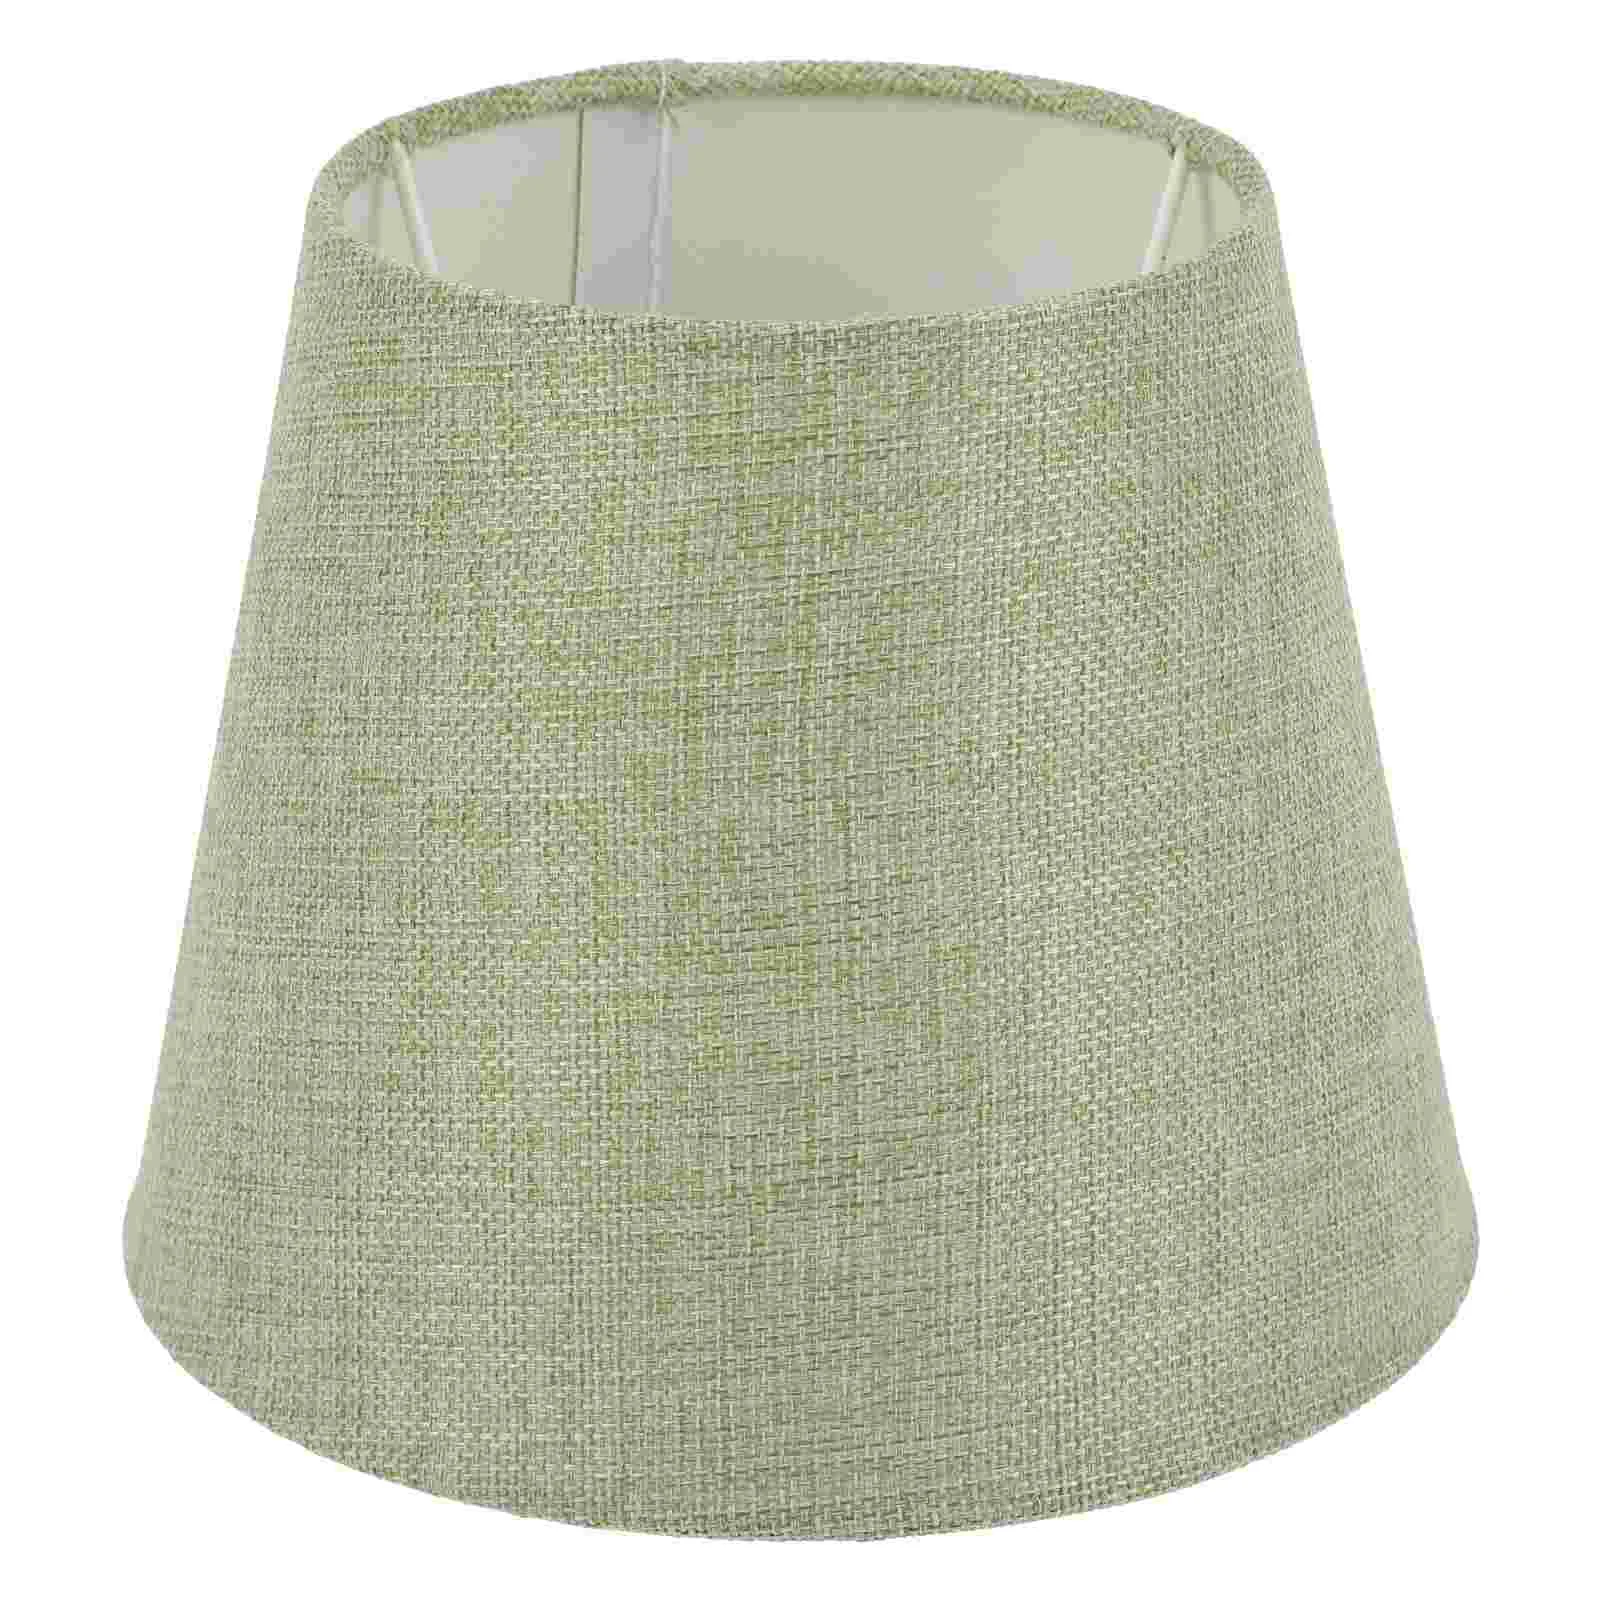 

Lamp Shade Lampshade Shades Light Table Pendant Fabric Chandelier Drum Floorcover Cliplamps Ceiling Cloth Bedsidewall Bell